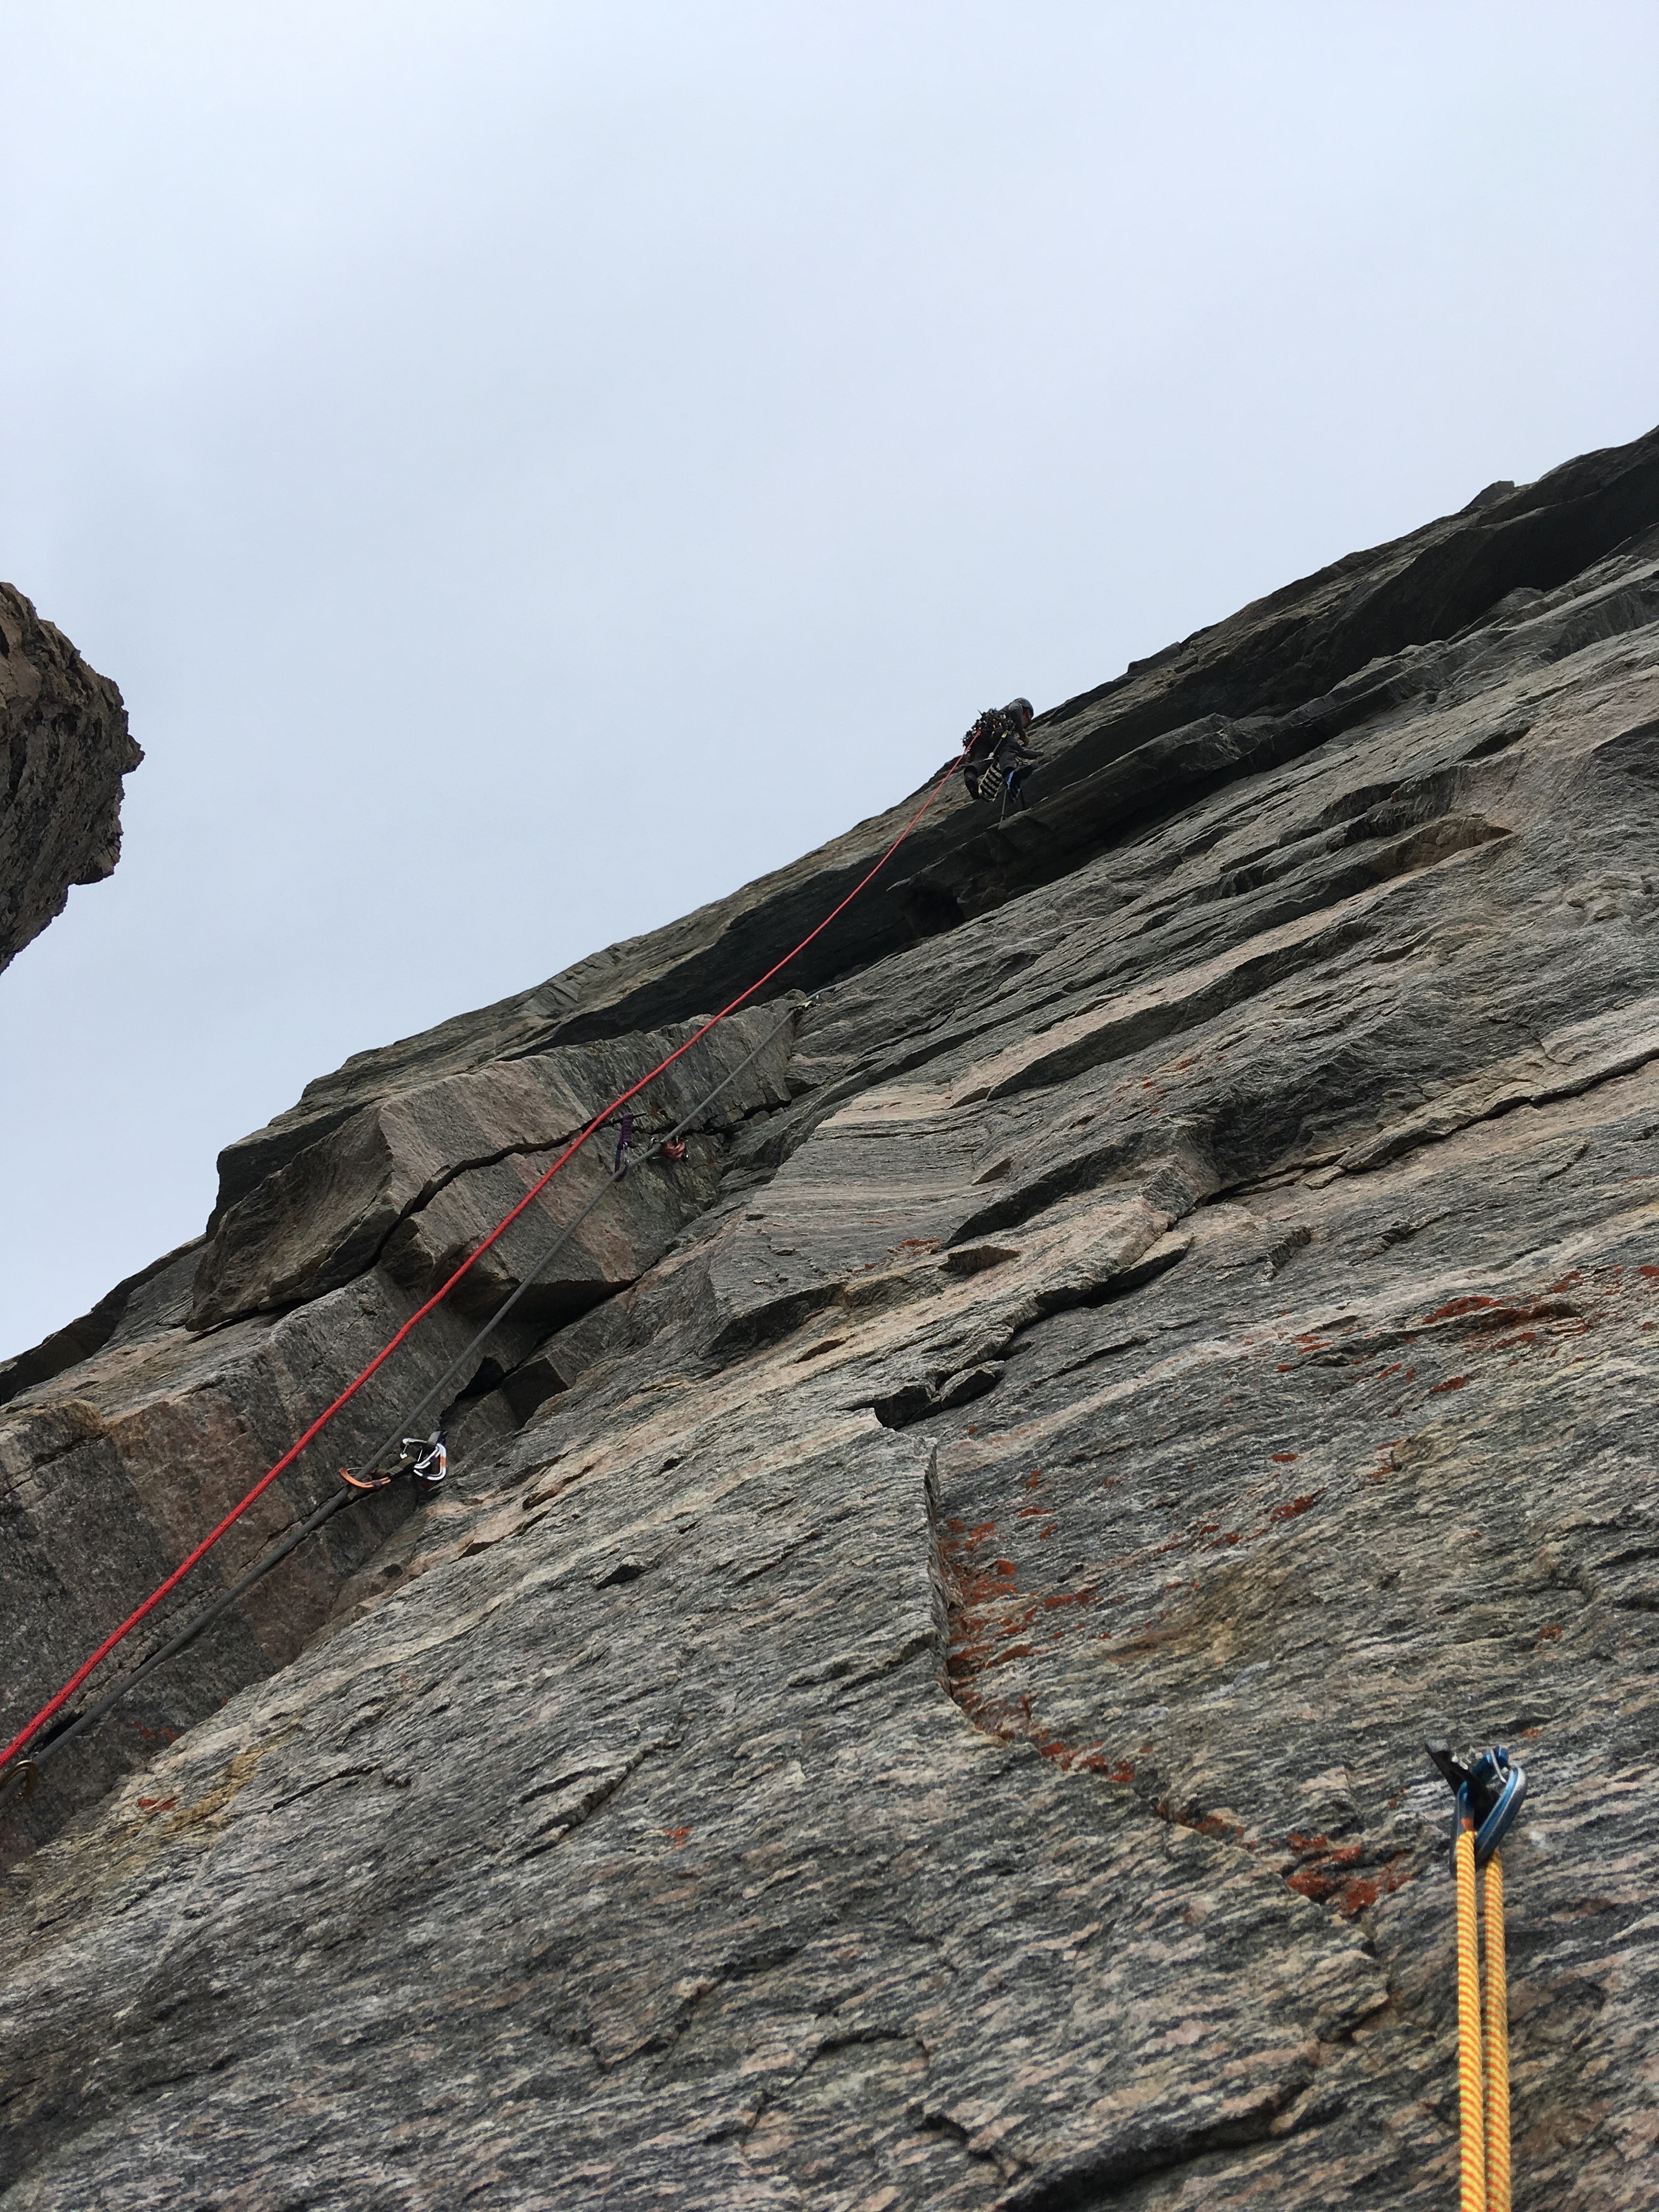 Sam England leading over the roof where he encountered the death block on Pitch 6. [Photo] Ryan Little